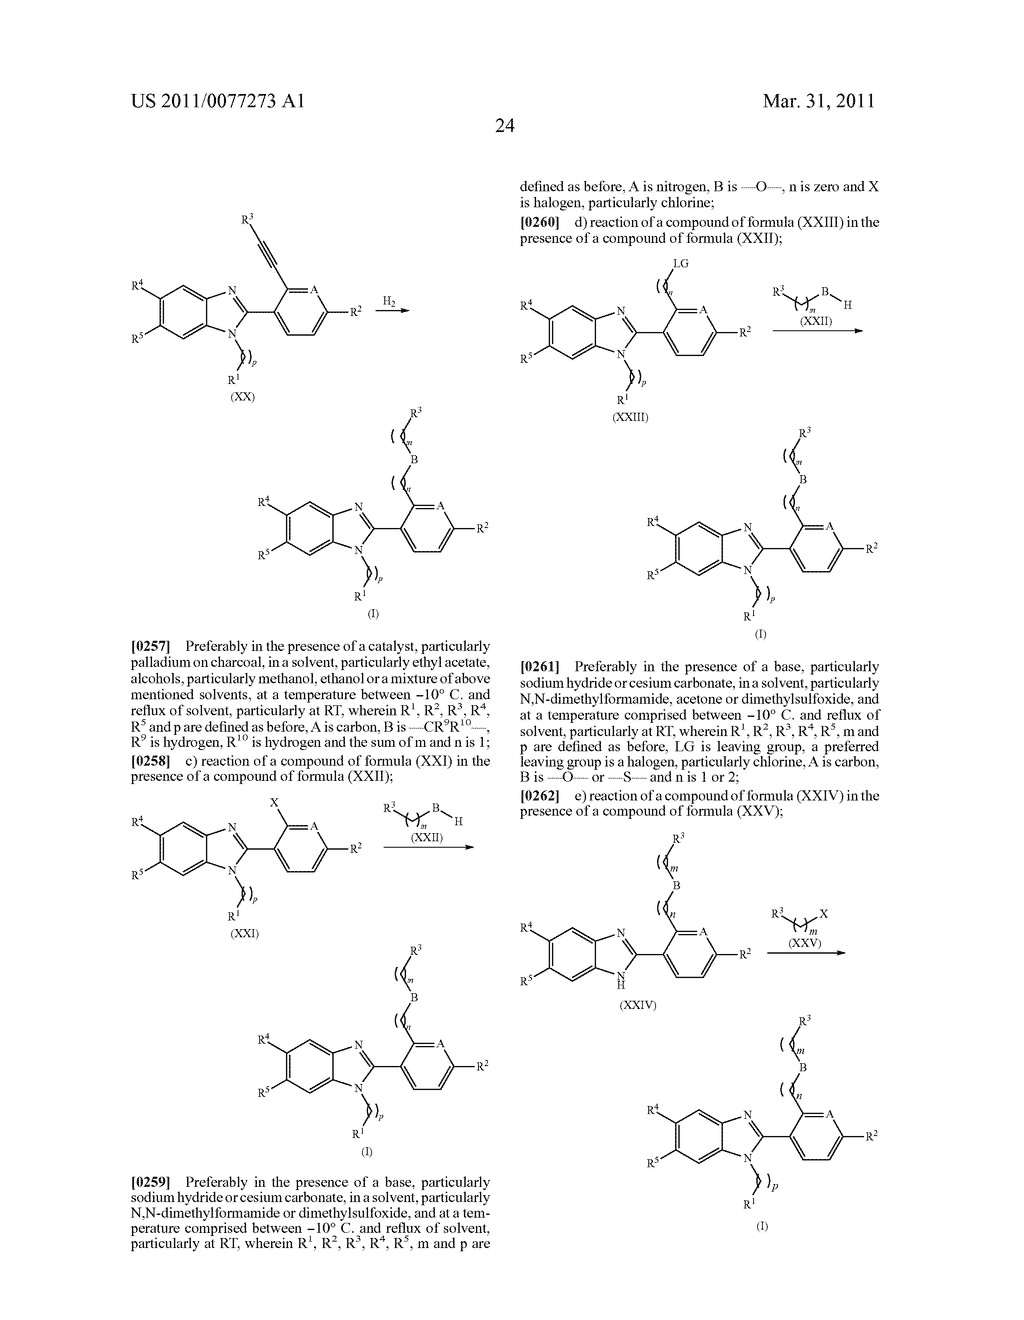 NEW BENZIMIDAZOLE DERIVATIVES - diagram, schematic, and image 25